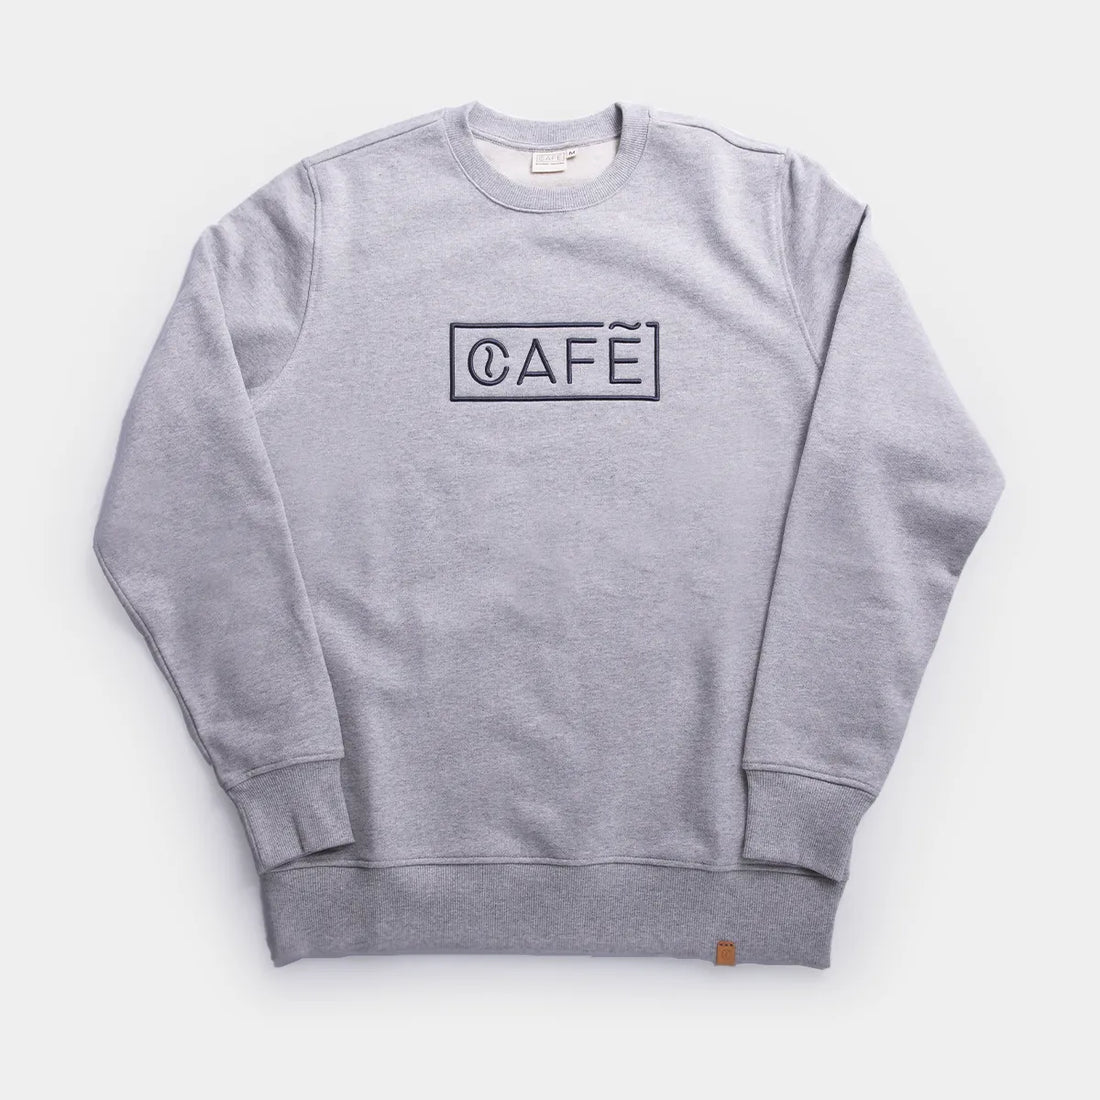 The Café Logo Embroidery Sweater in Grey Melange